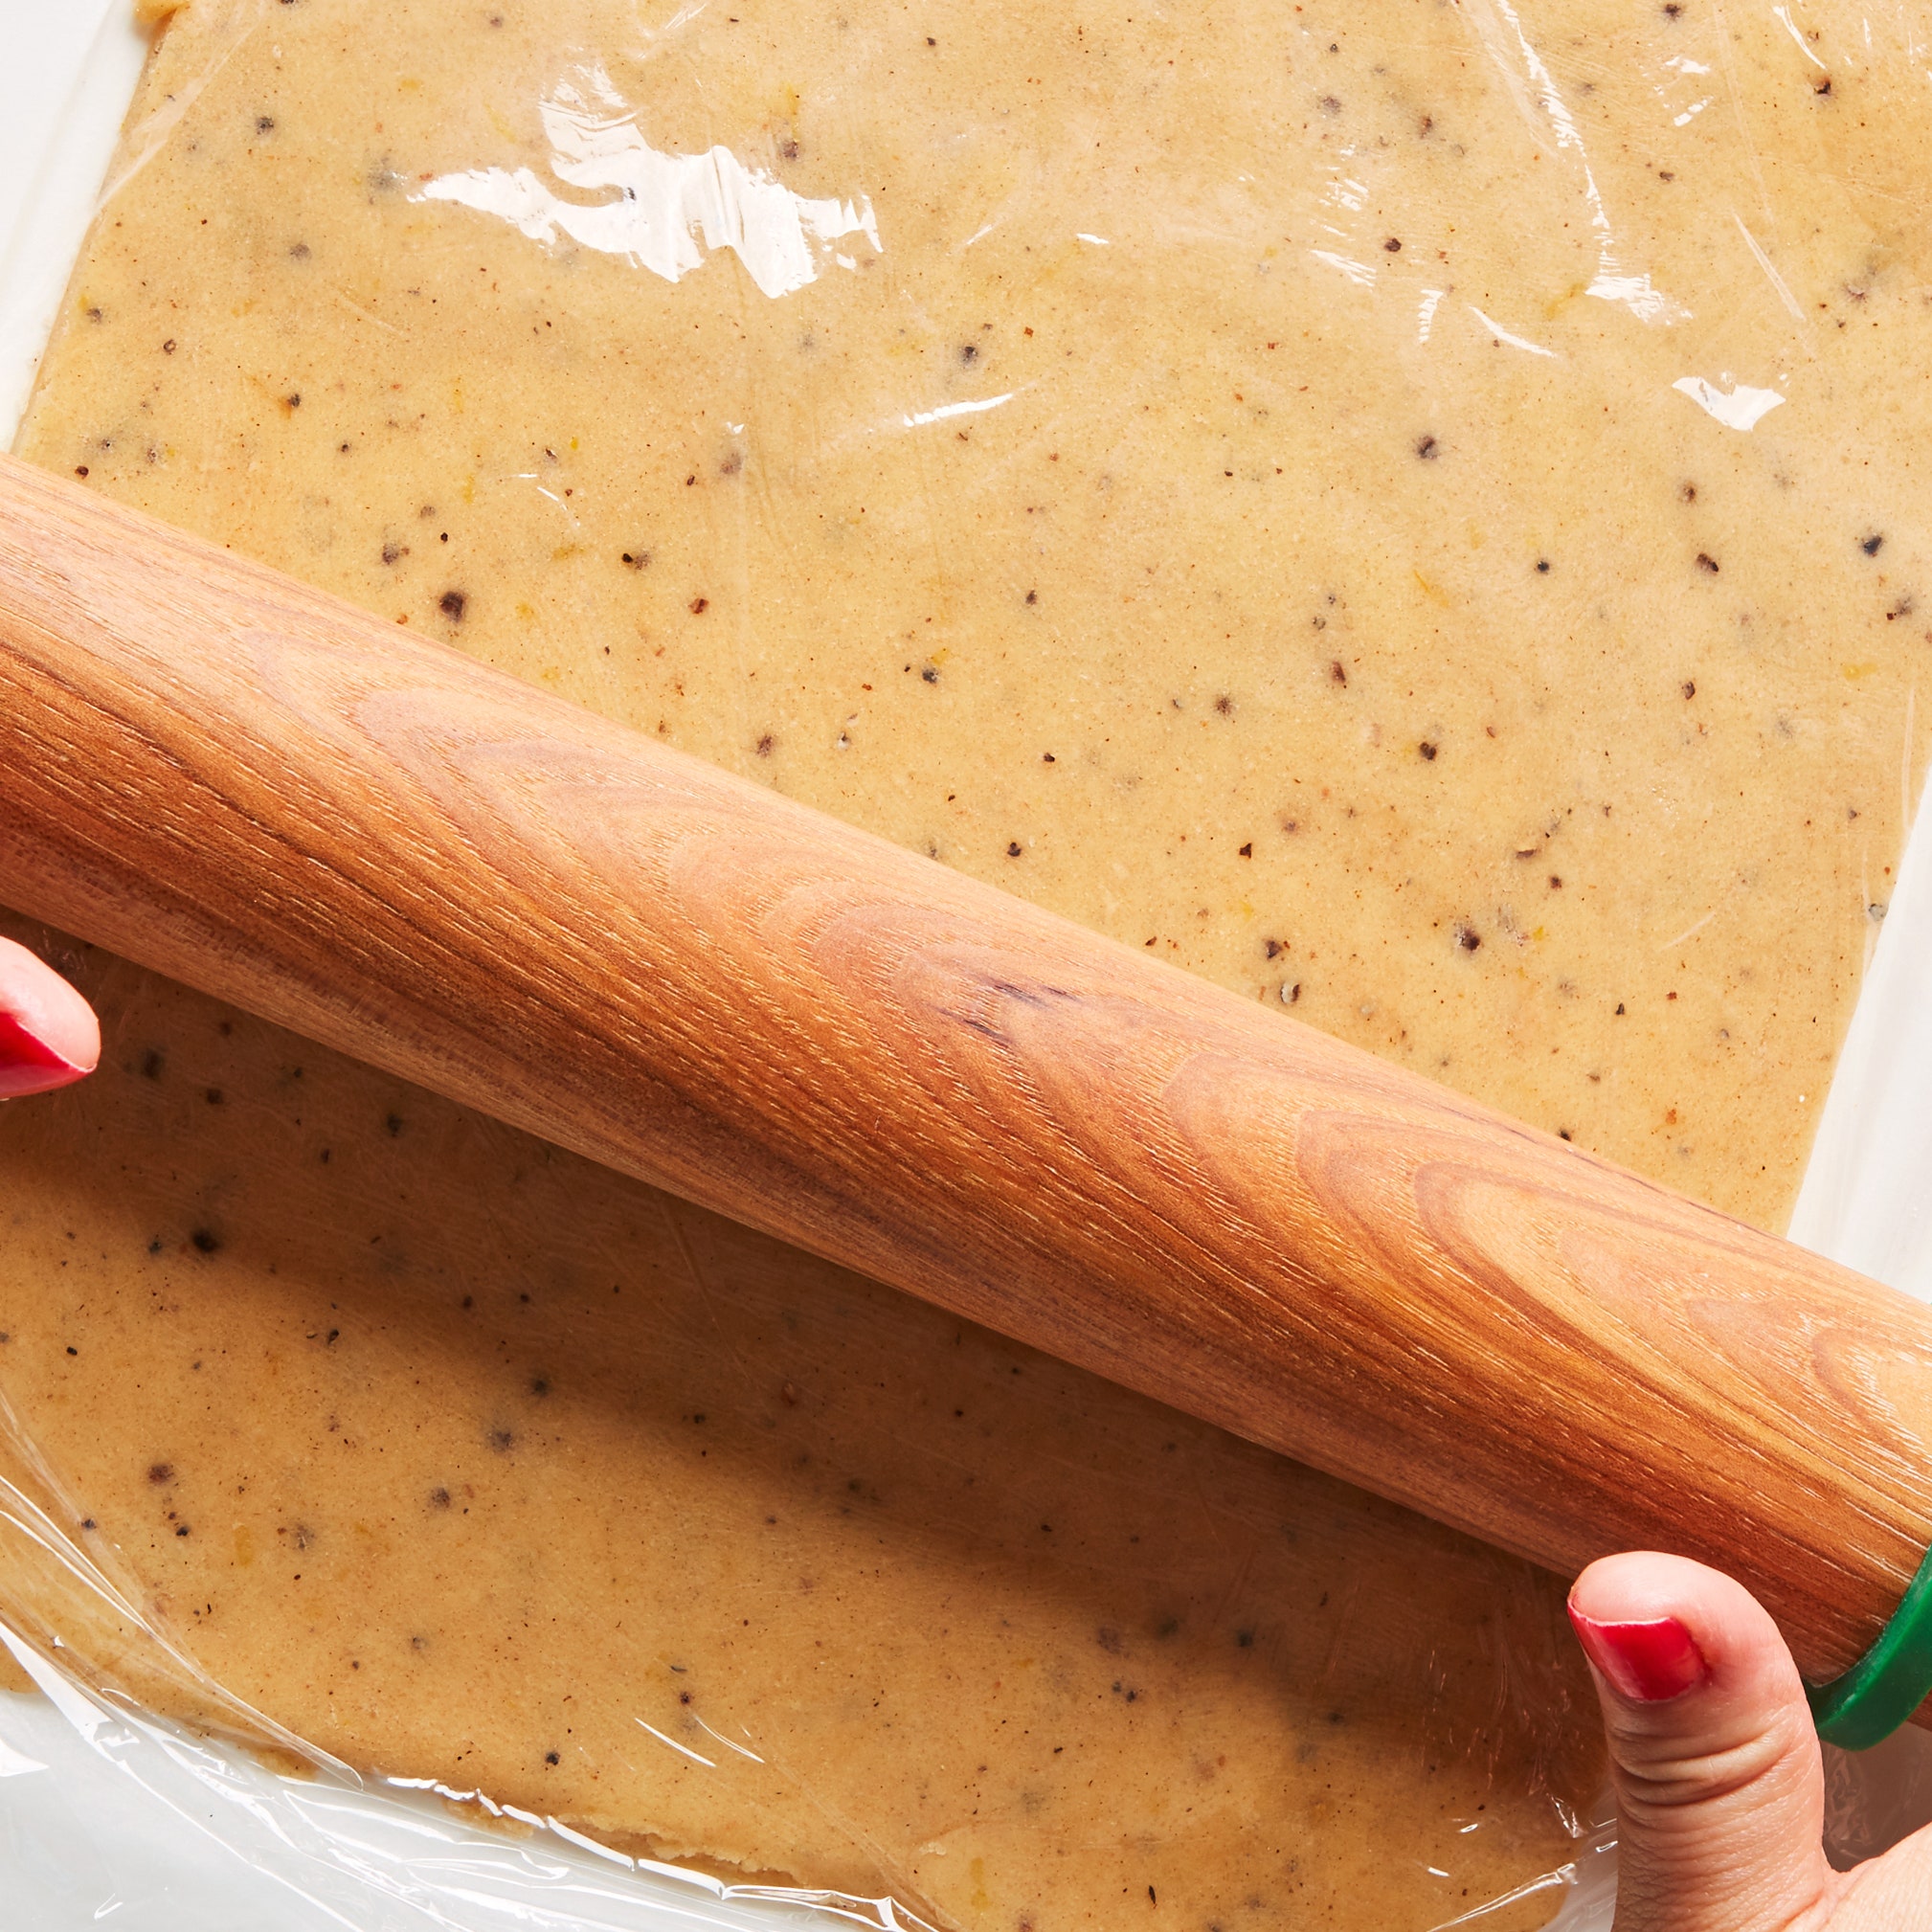 This $10 Baking Accessory Has Transformed My Pie Dough Game